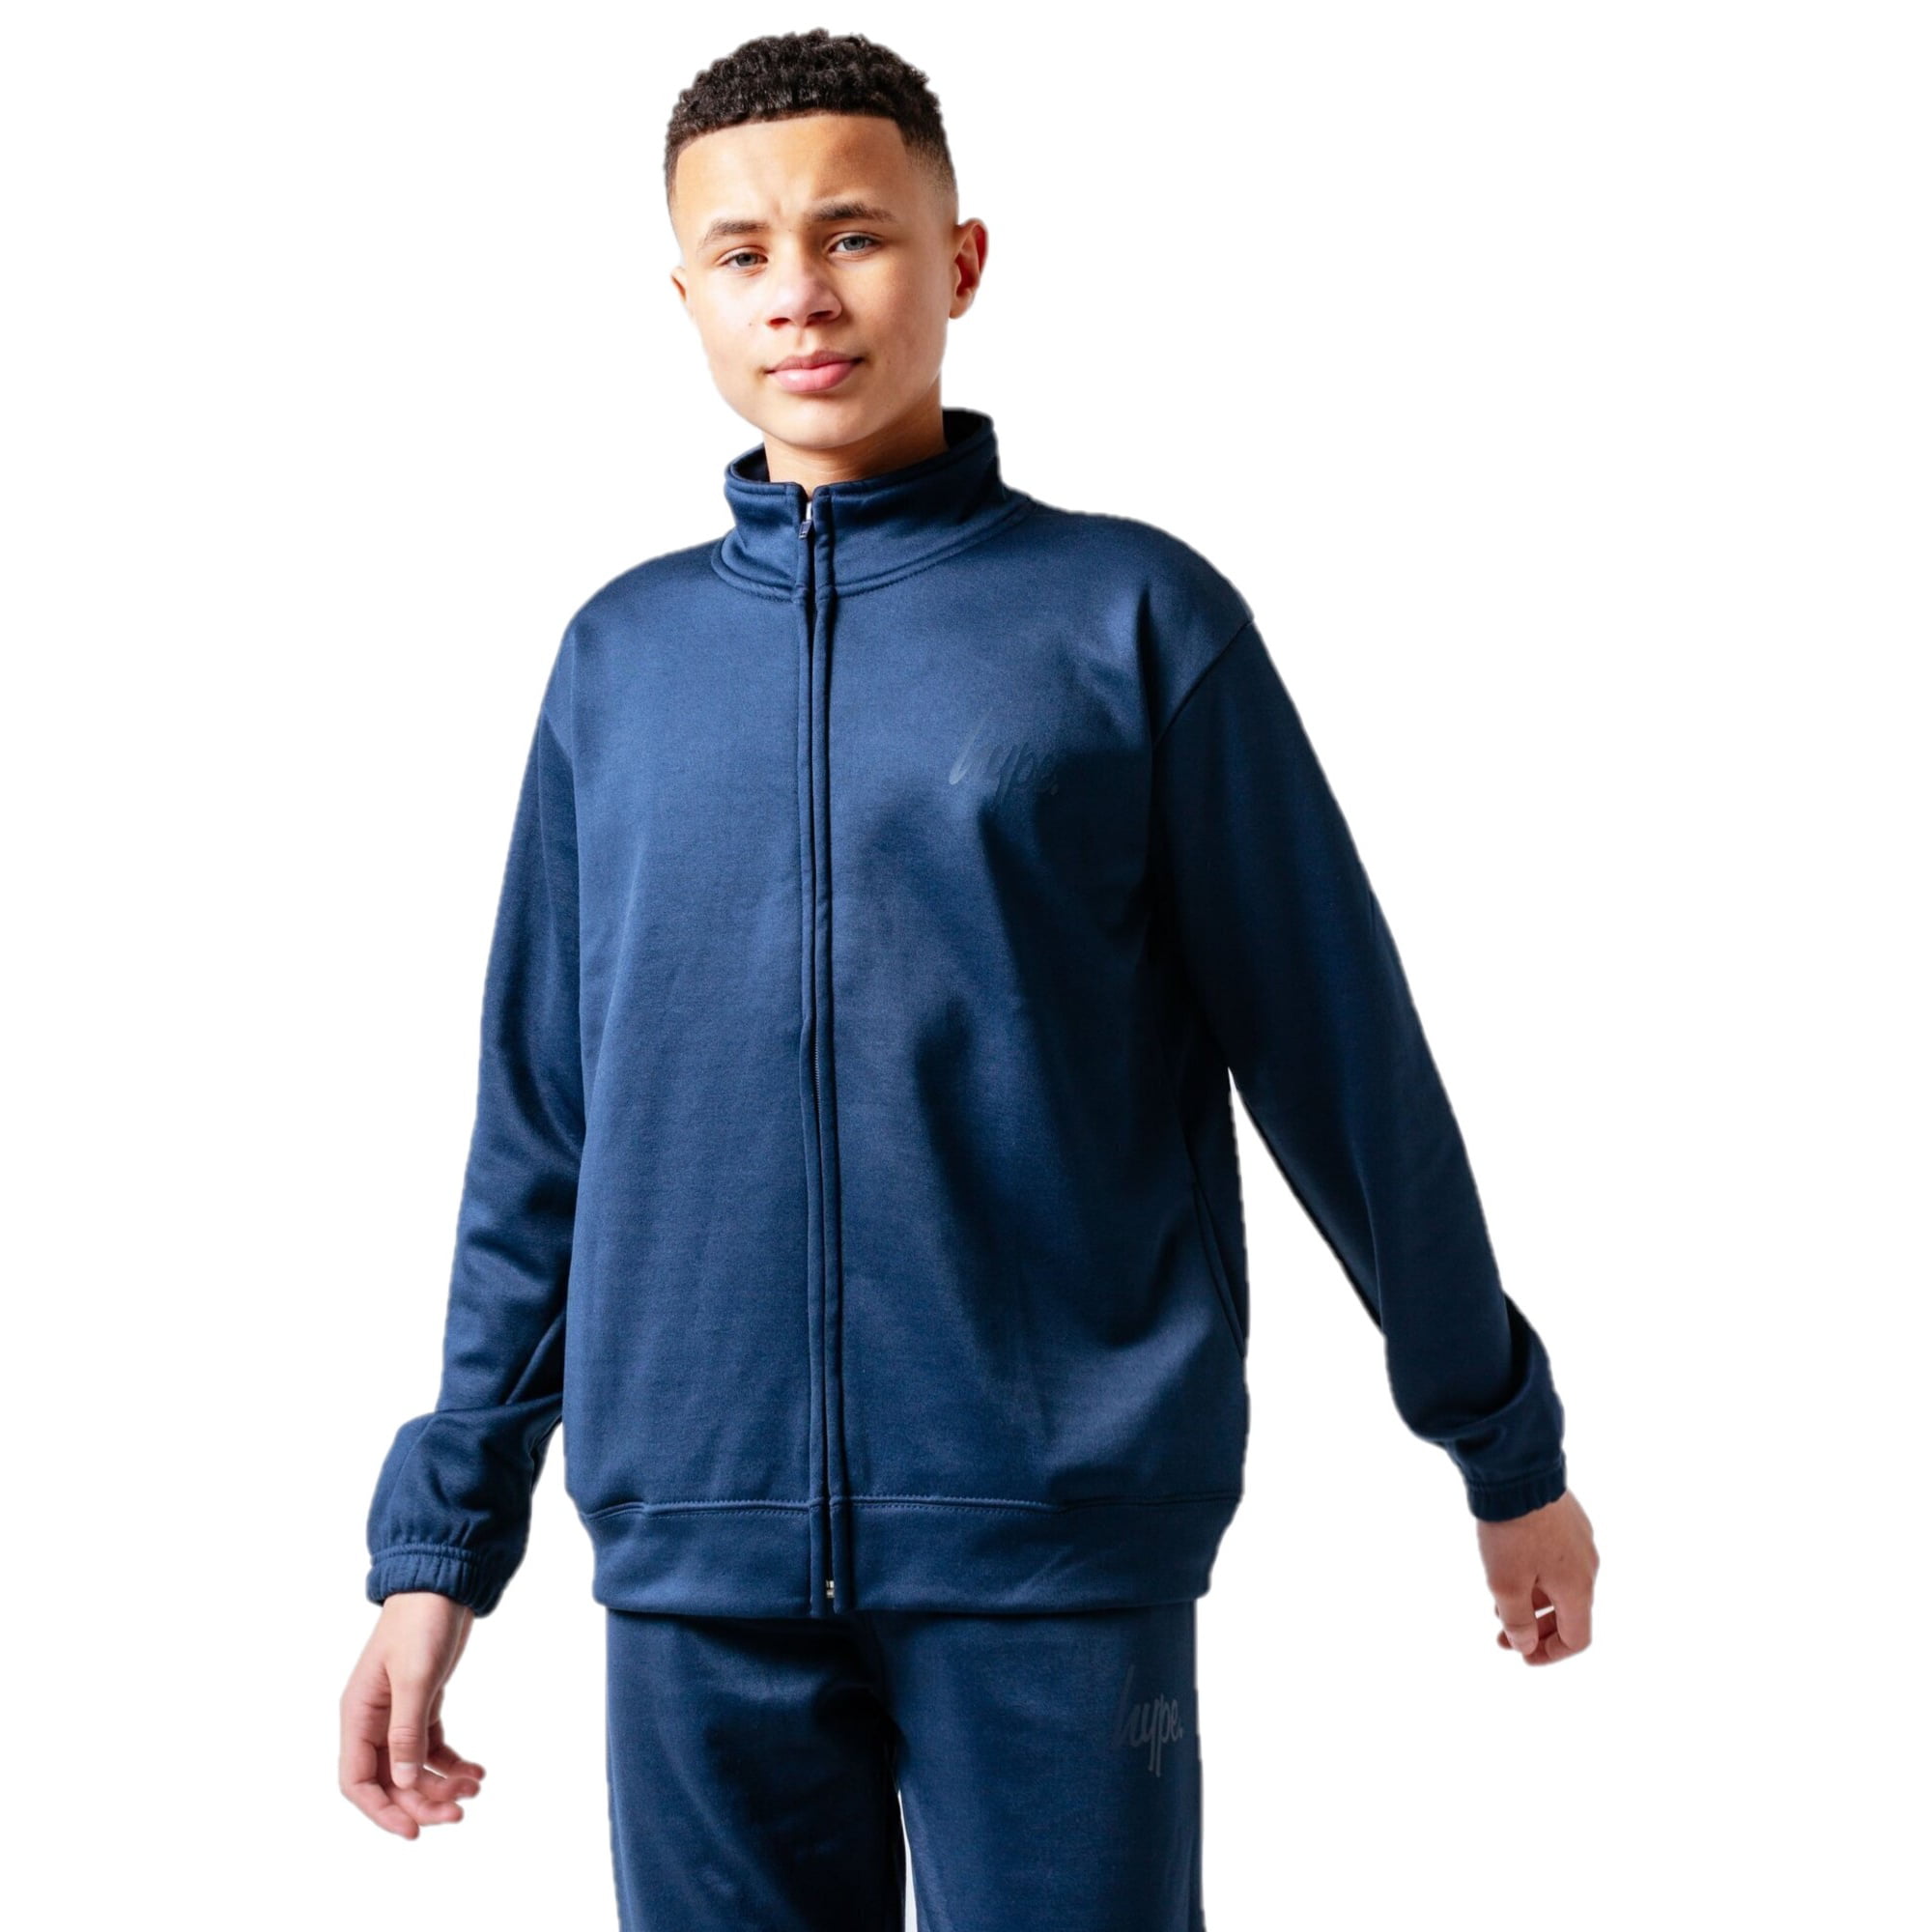 Hype Hype Boys Essential Tracksuit Sports Full Zip Top Elasticated Waist Bottom 